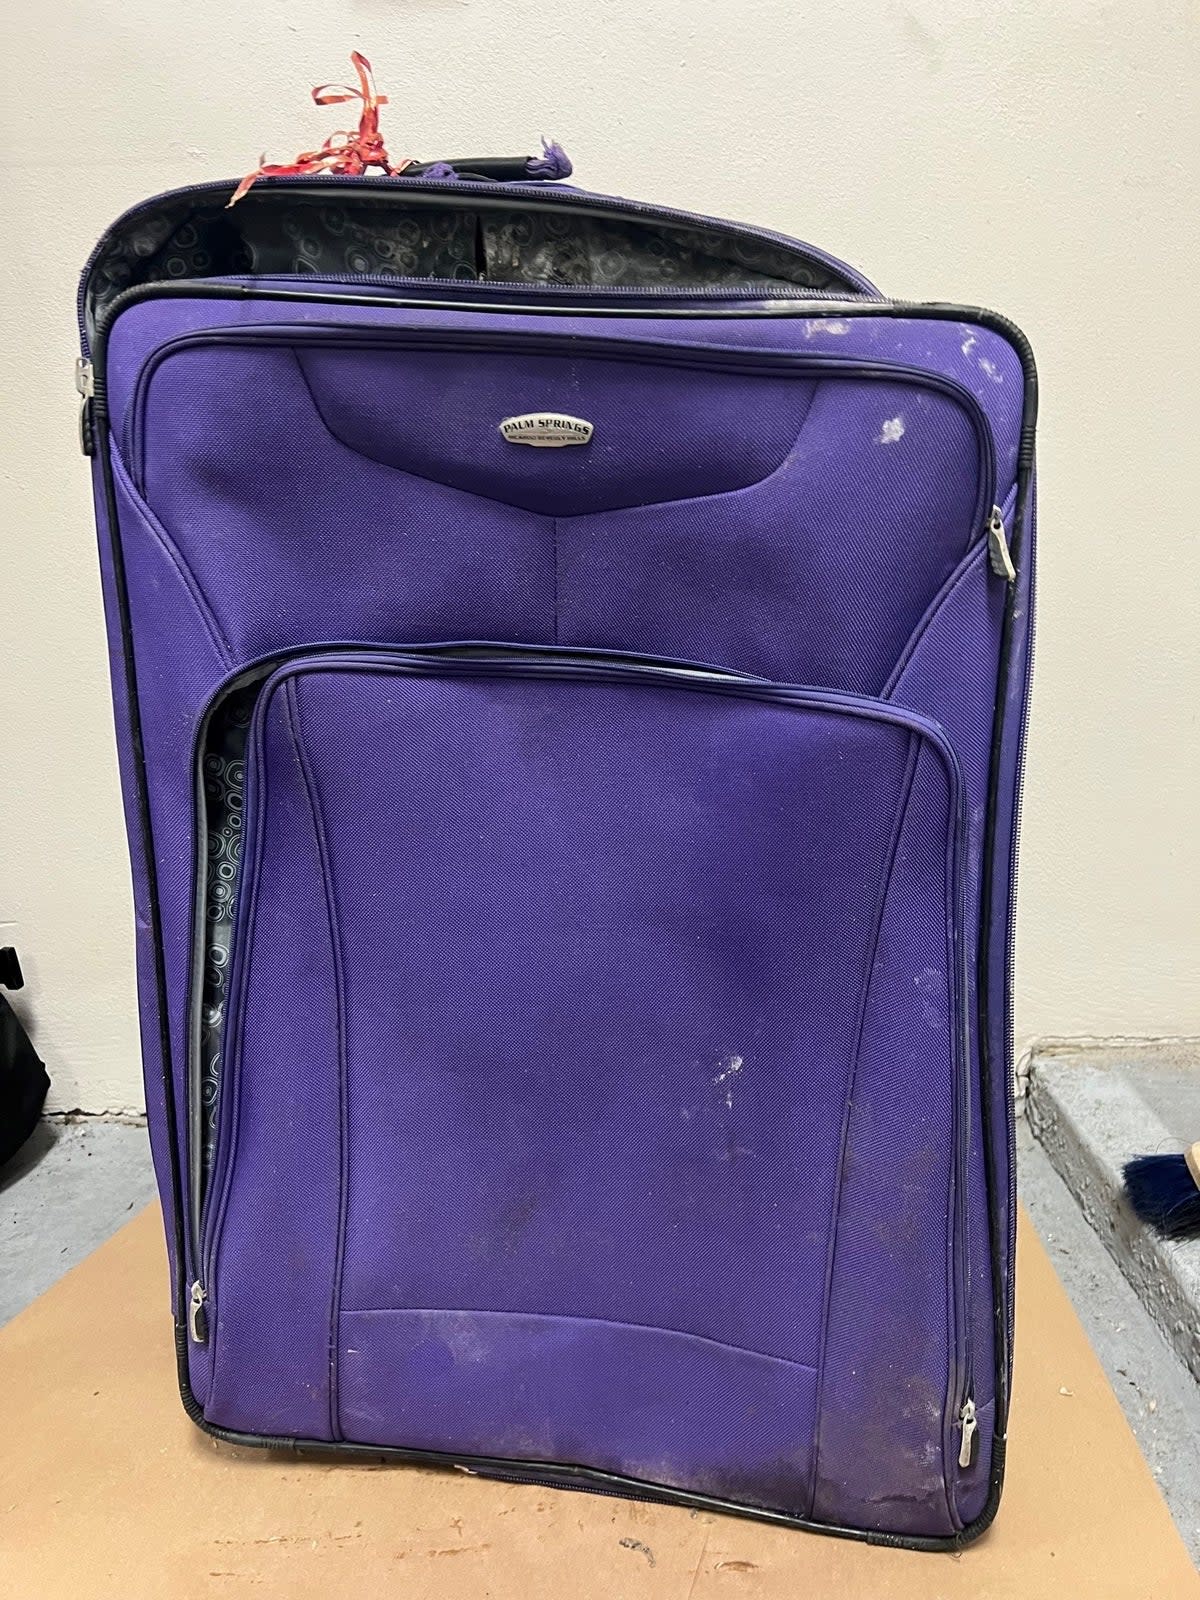 Police found the first suitcase with human remains hanging out of it when responding to a 911 call about a suspicious object in the waterway. It had been weighed down with landscaping rocks and had an airport barcode sticker for LATAM Airlines with the name 